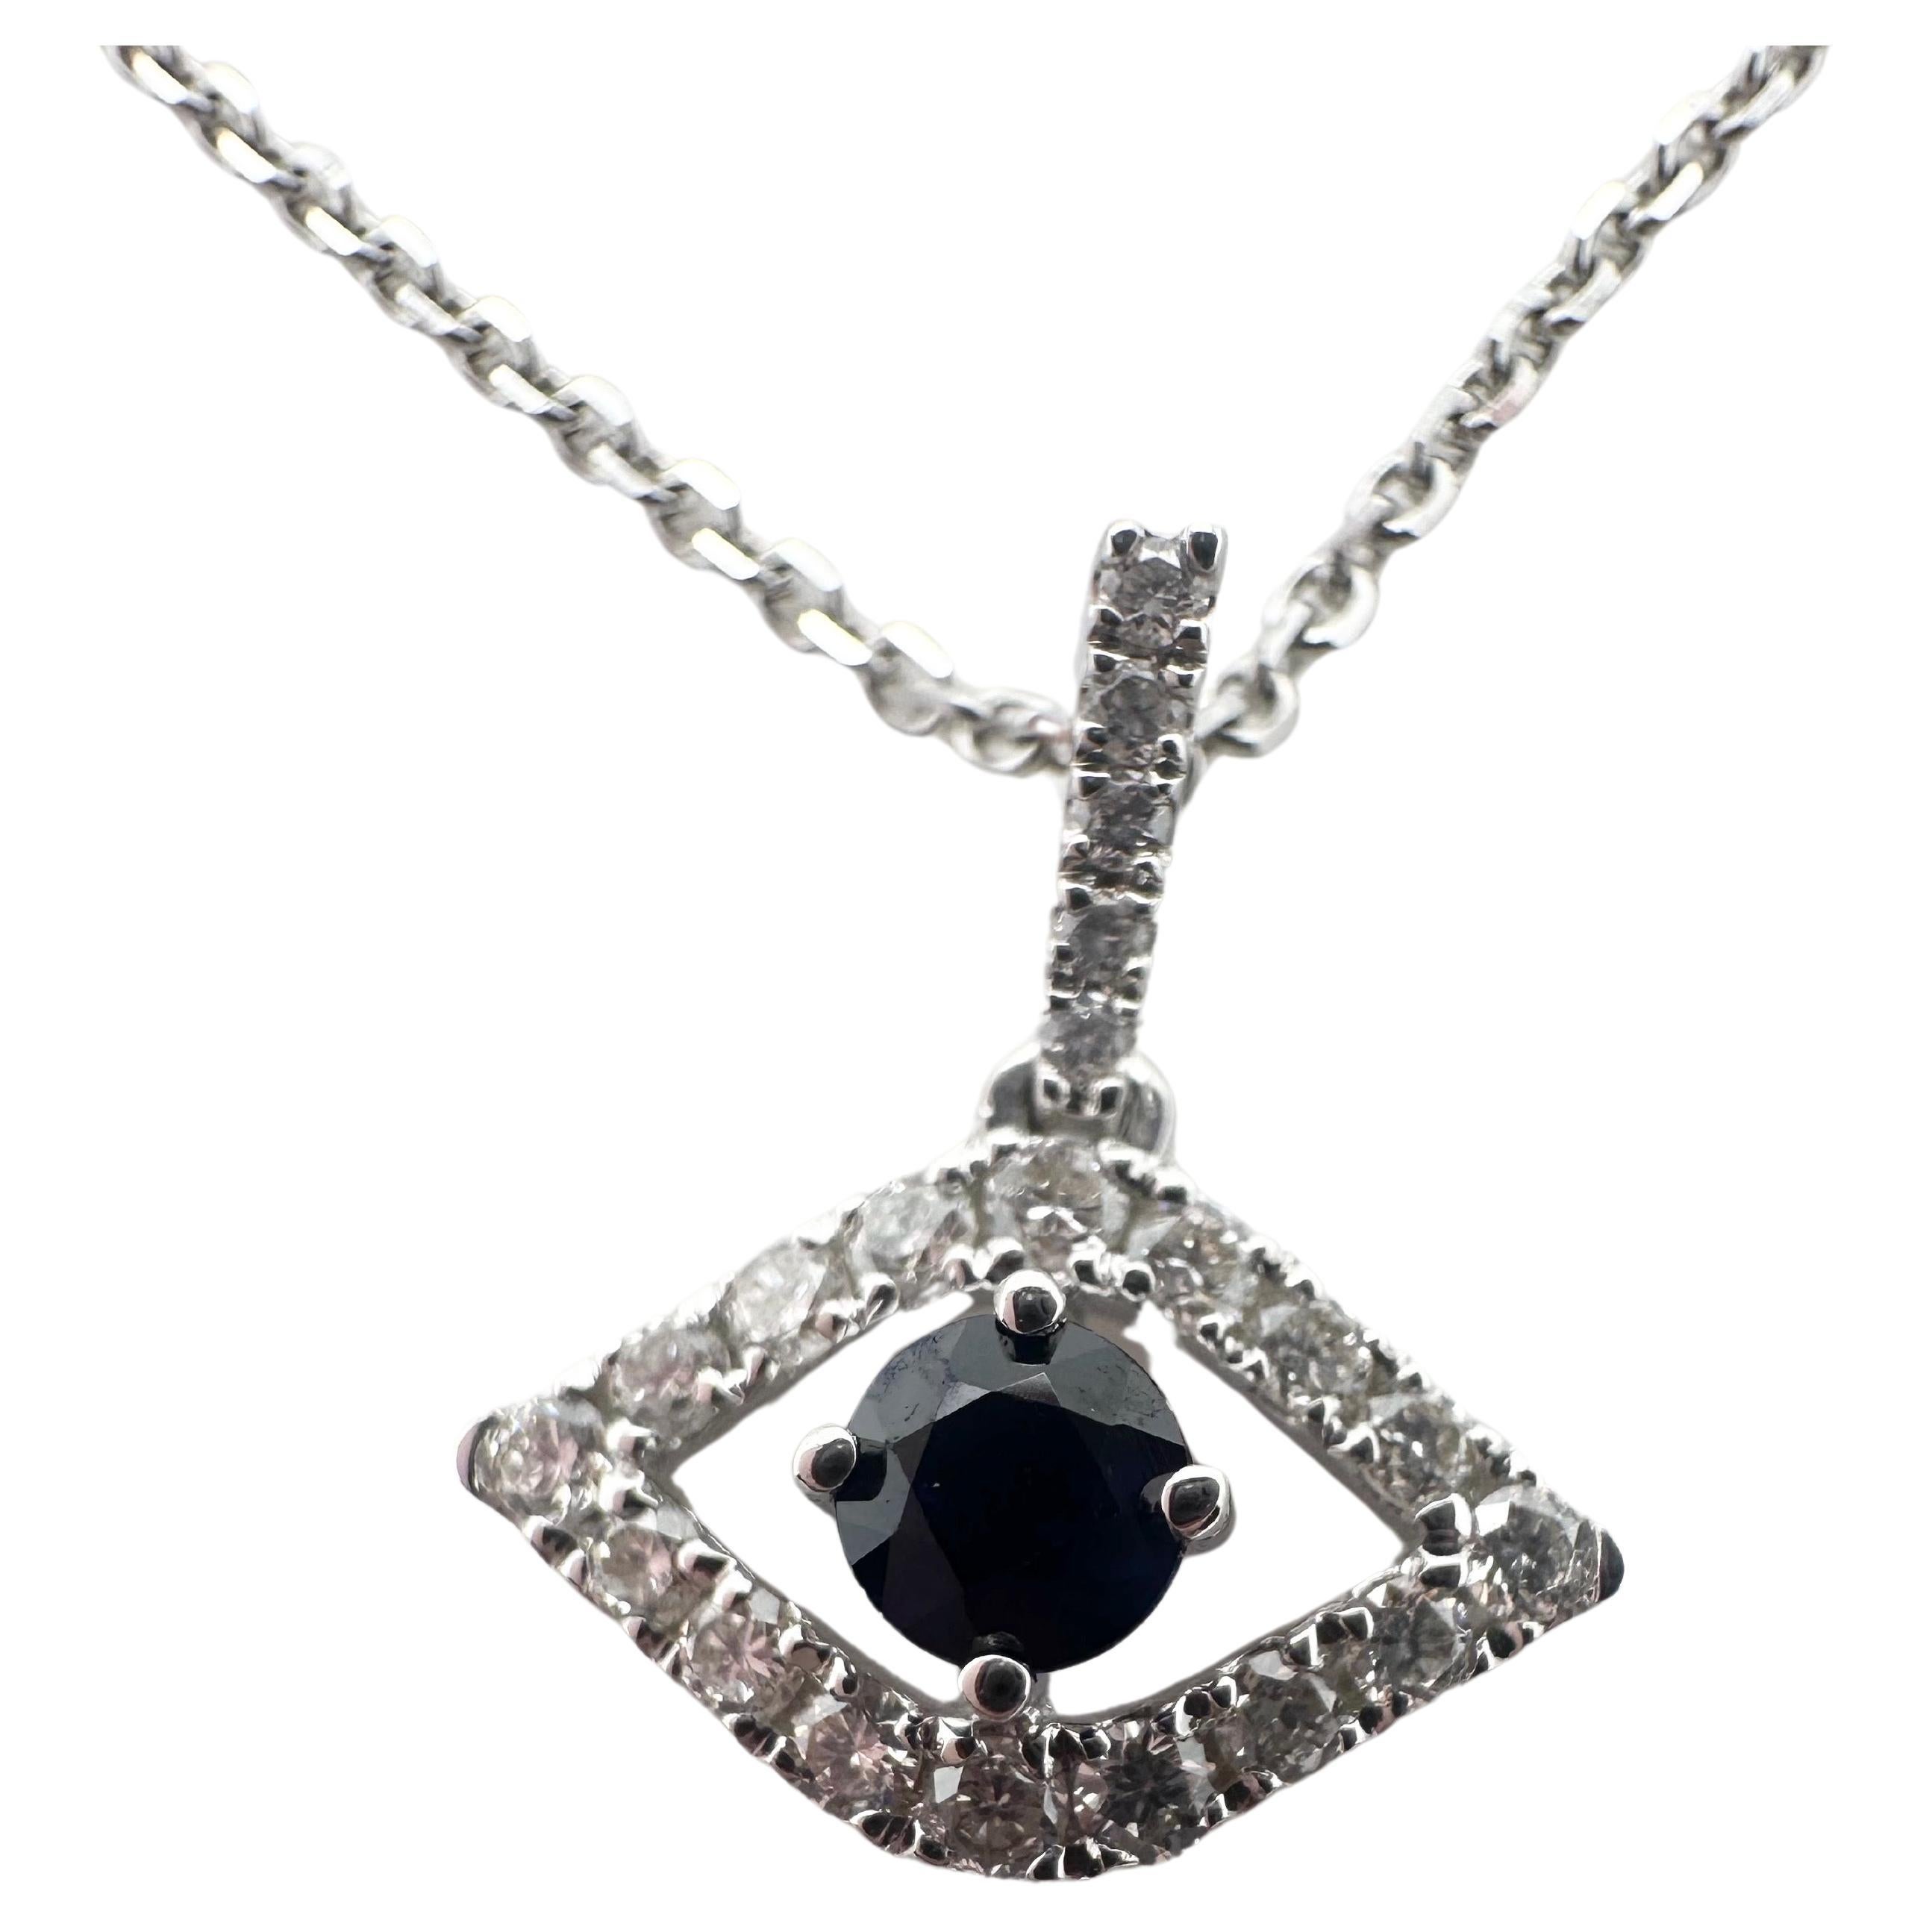 Evil eye pendant necklace 14KT white gold Natural sapphires and diamonds pendant